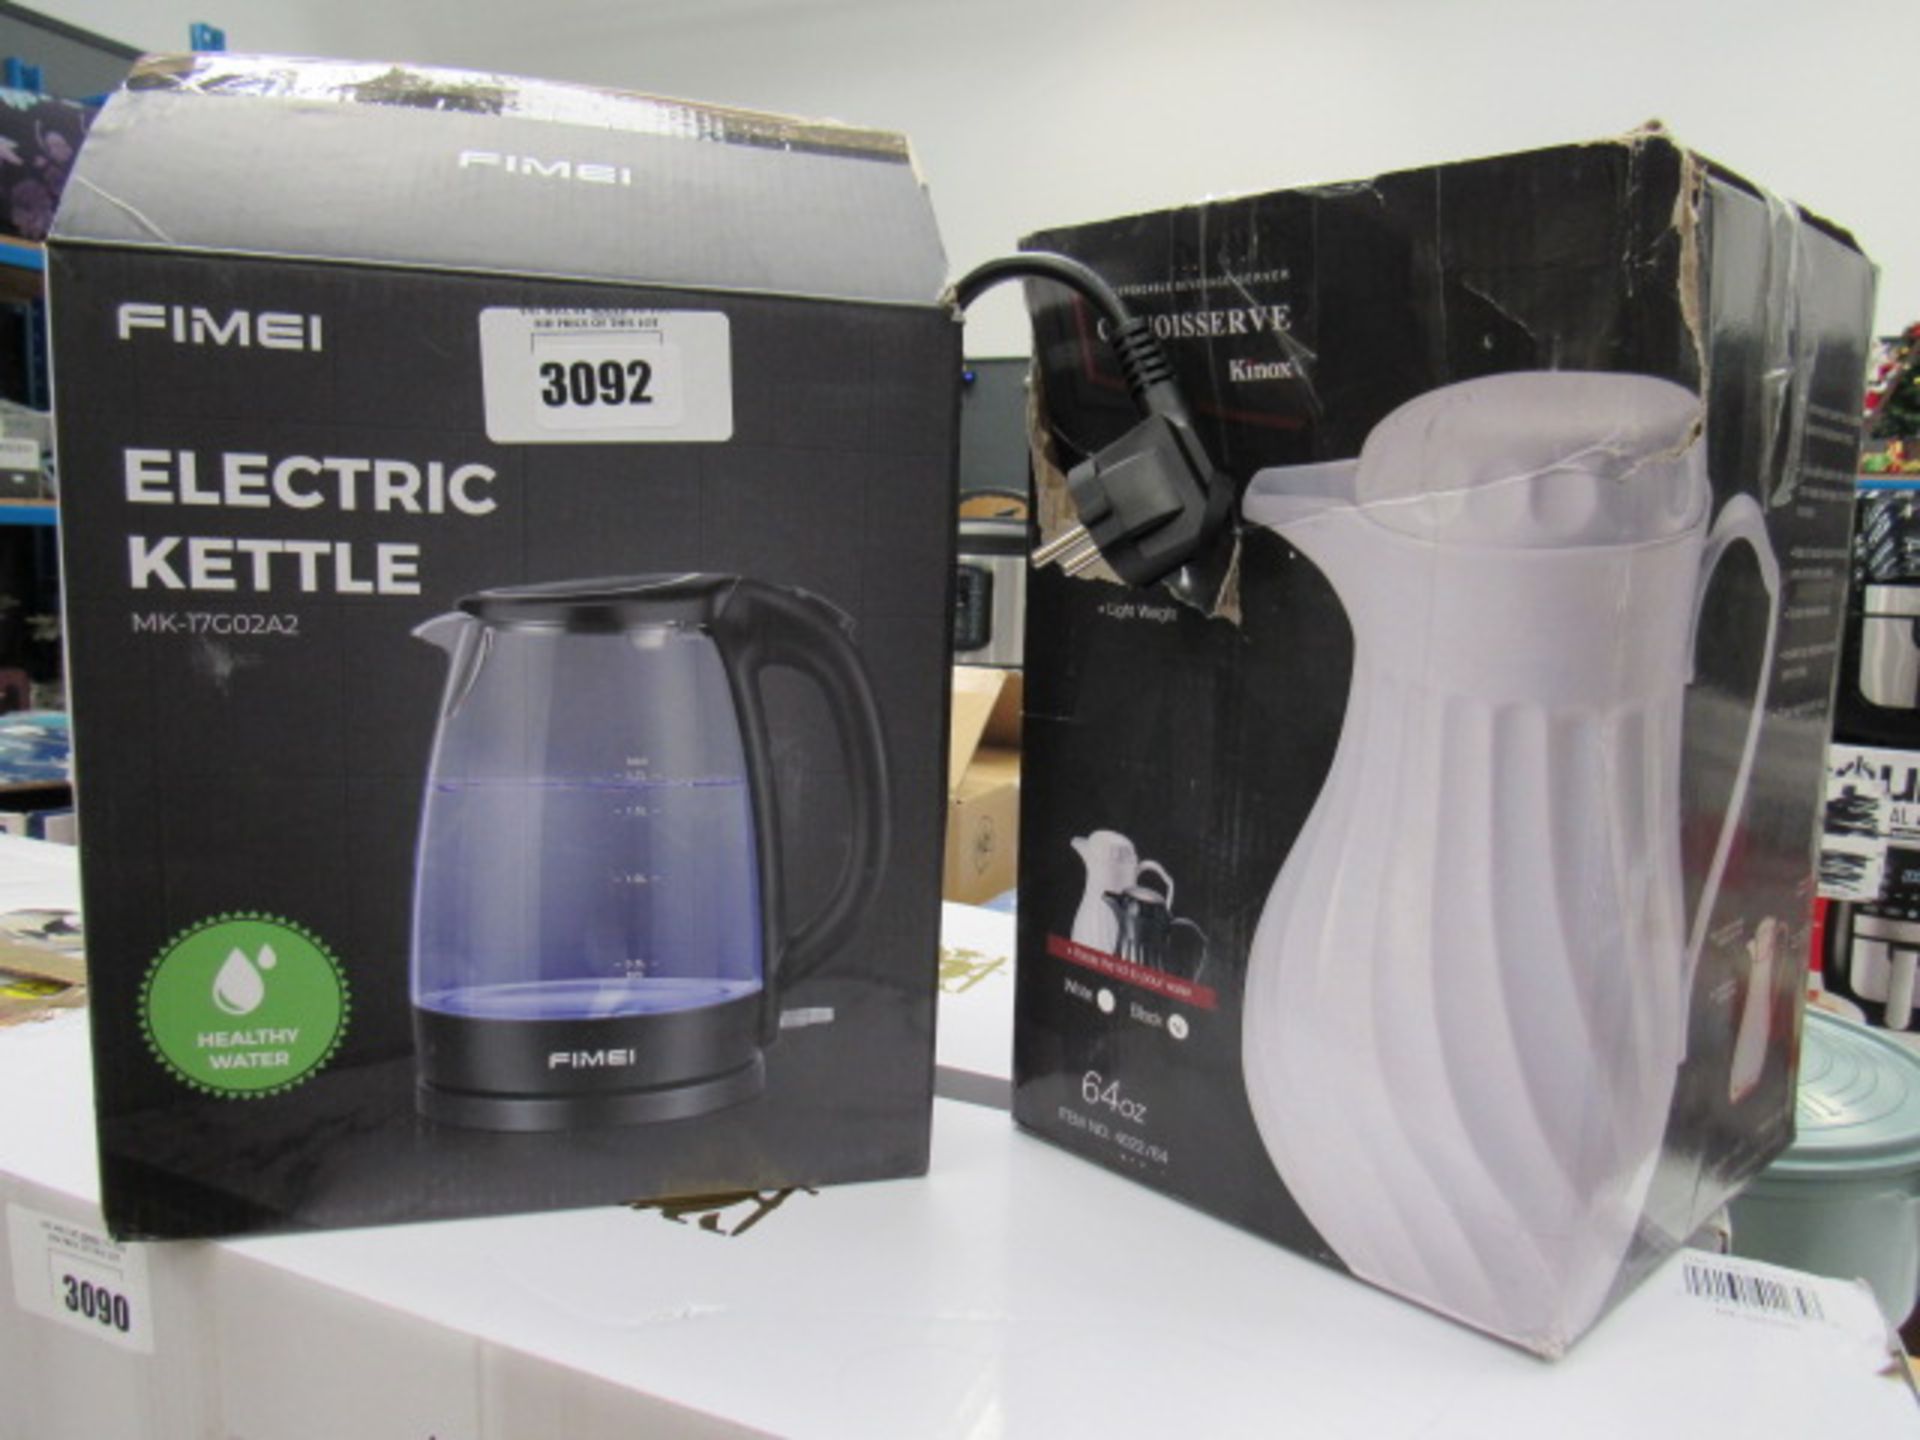 Electric kettle and a beverage server